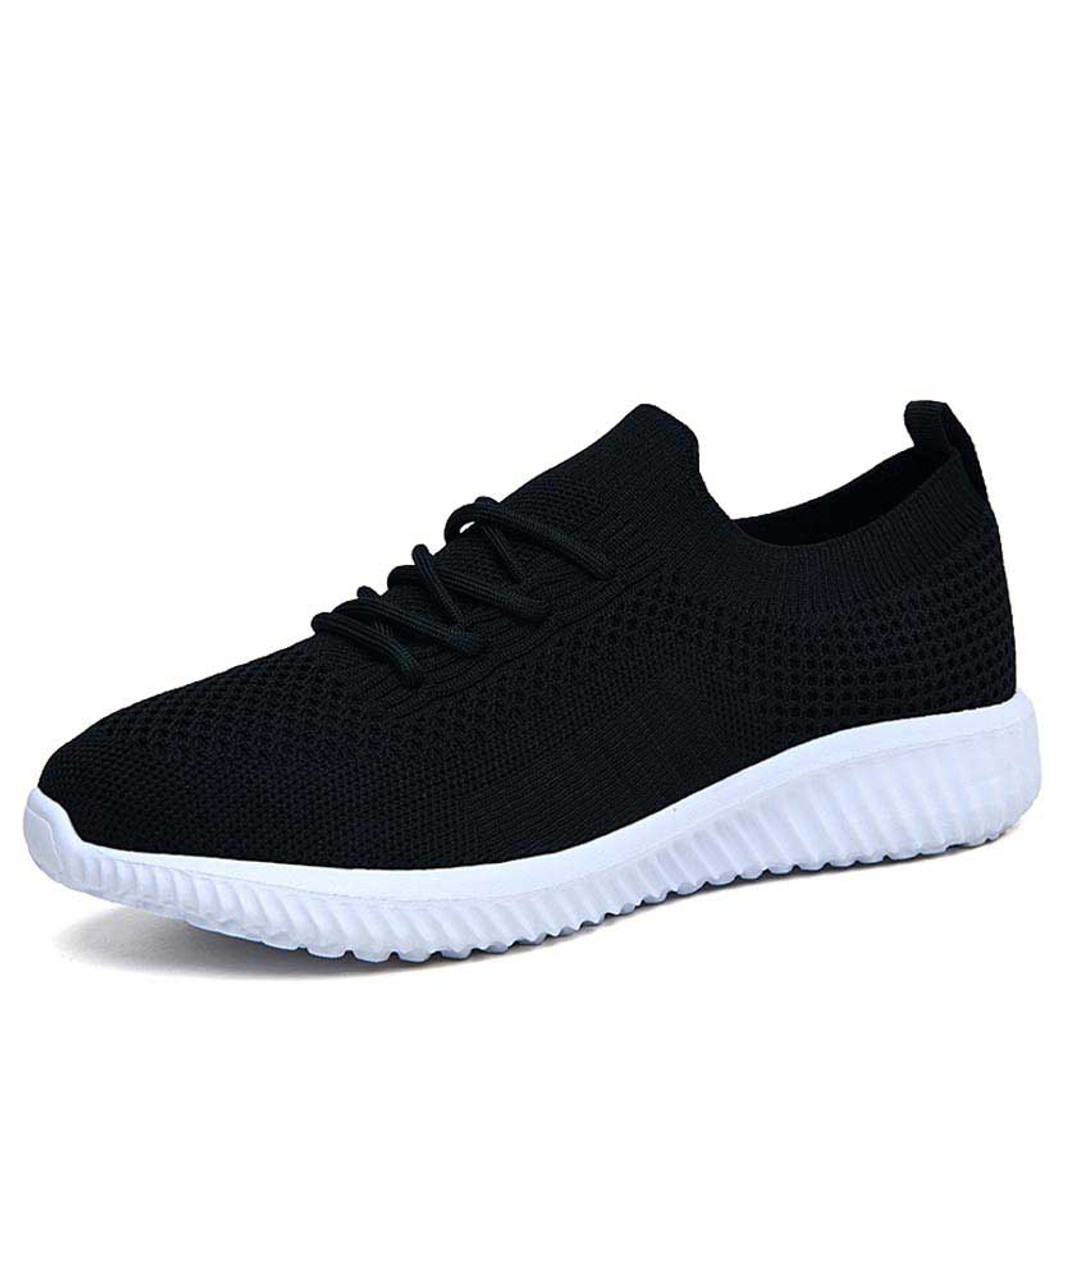 flyknit casual shoes